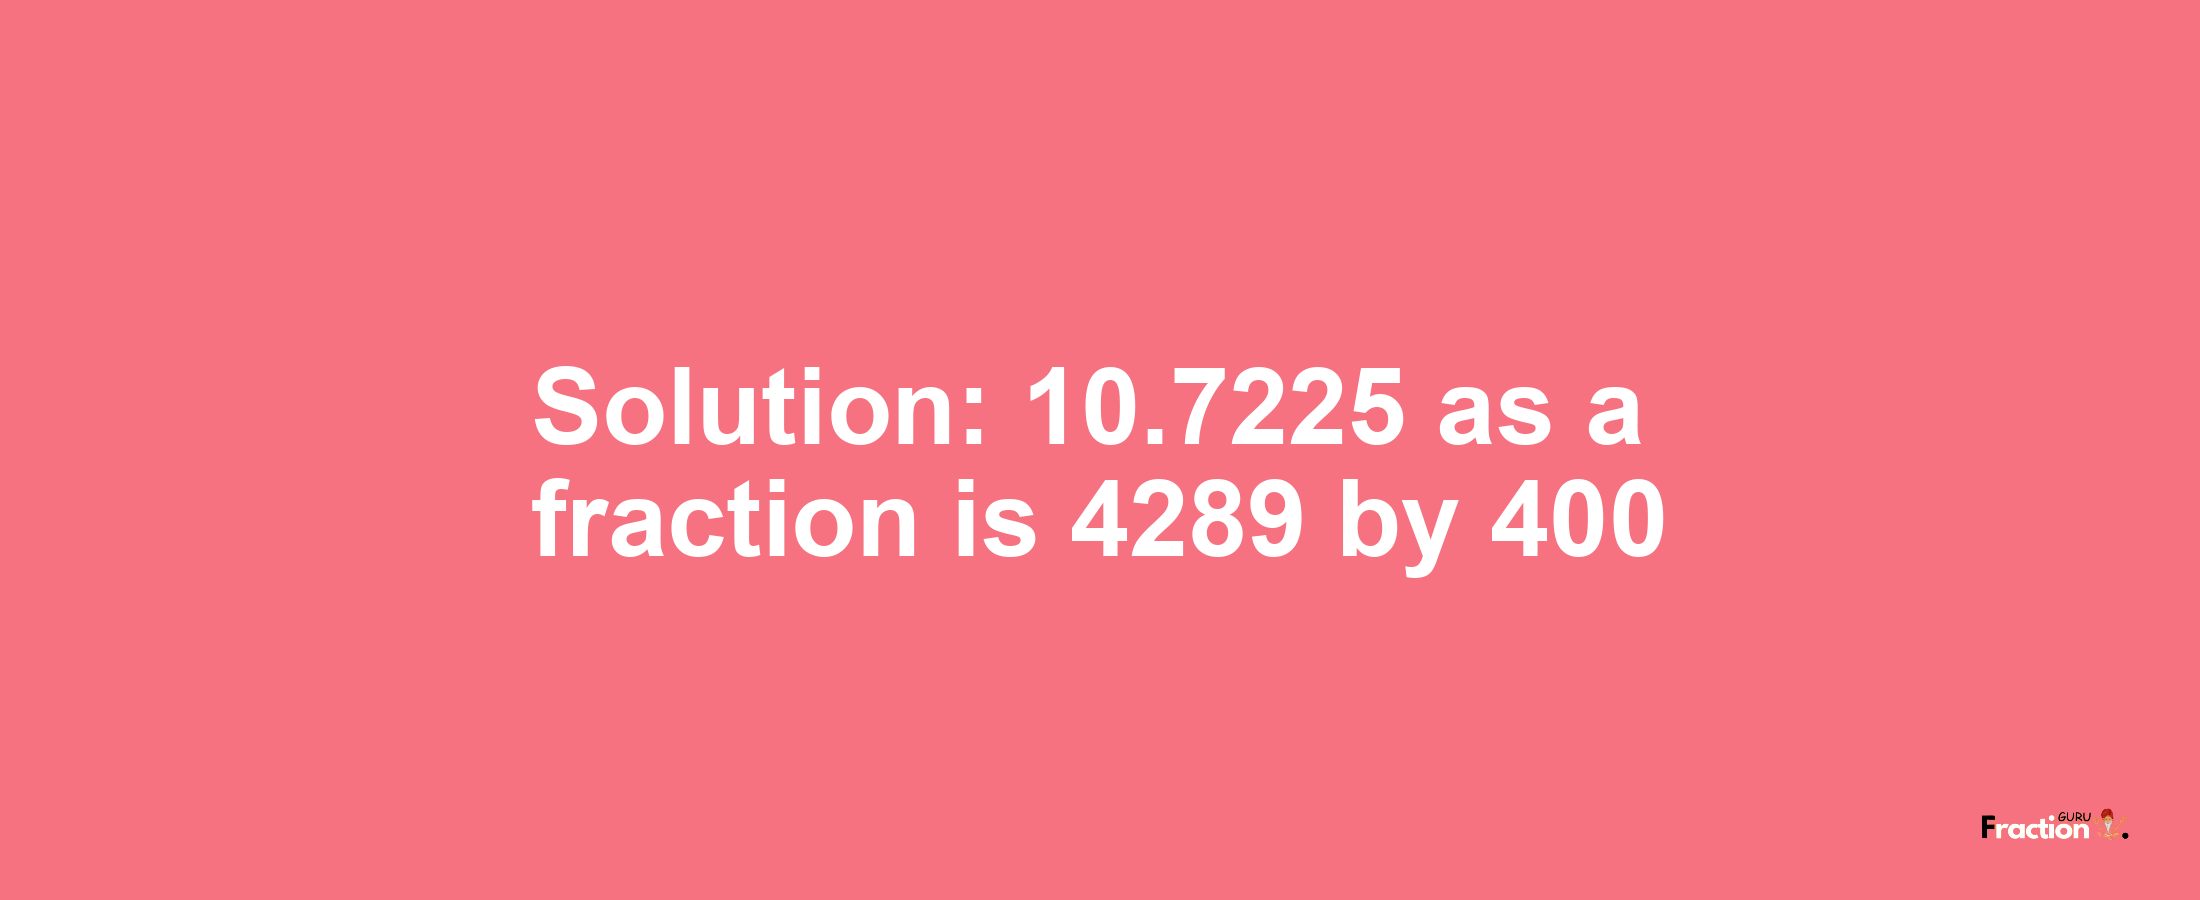 Solution:10.7225 as a fraction is 4289/400